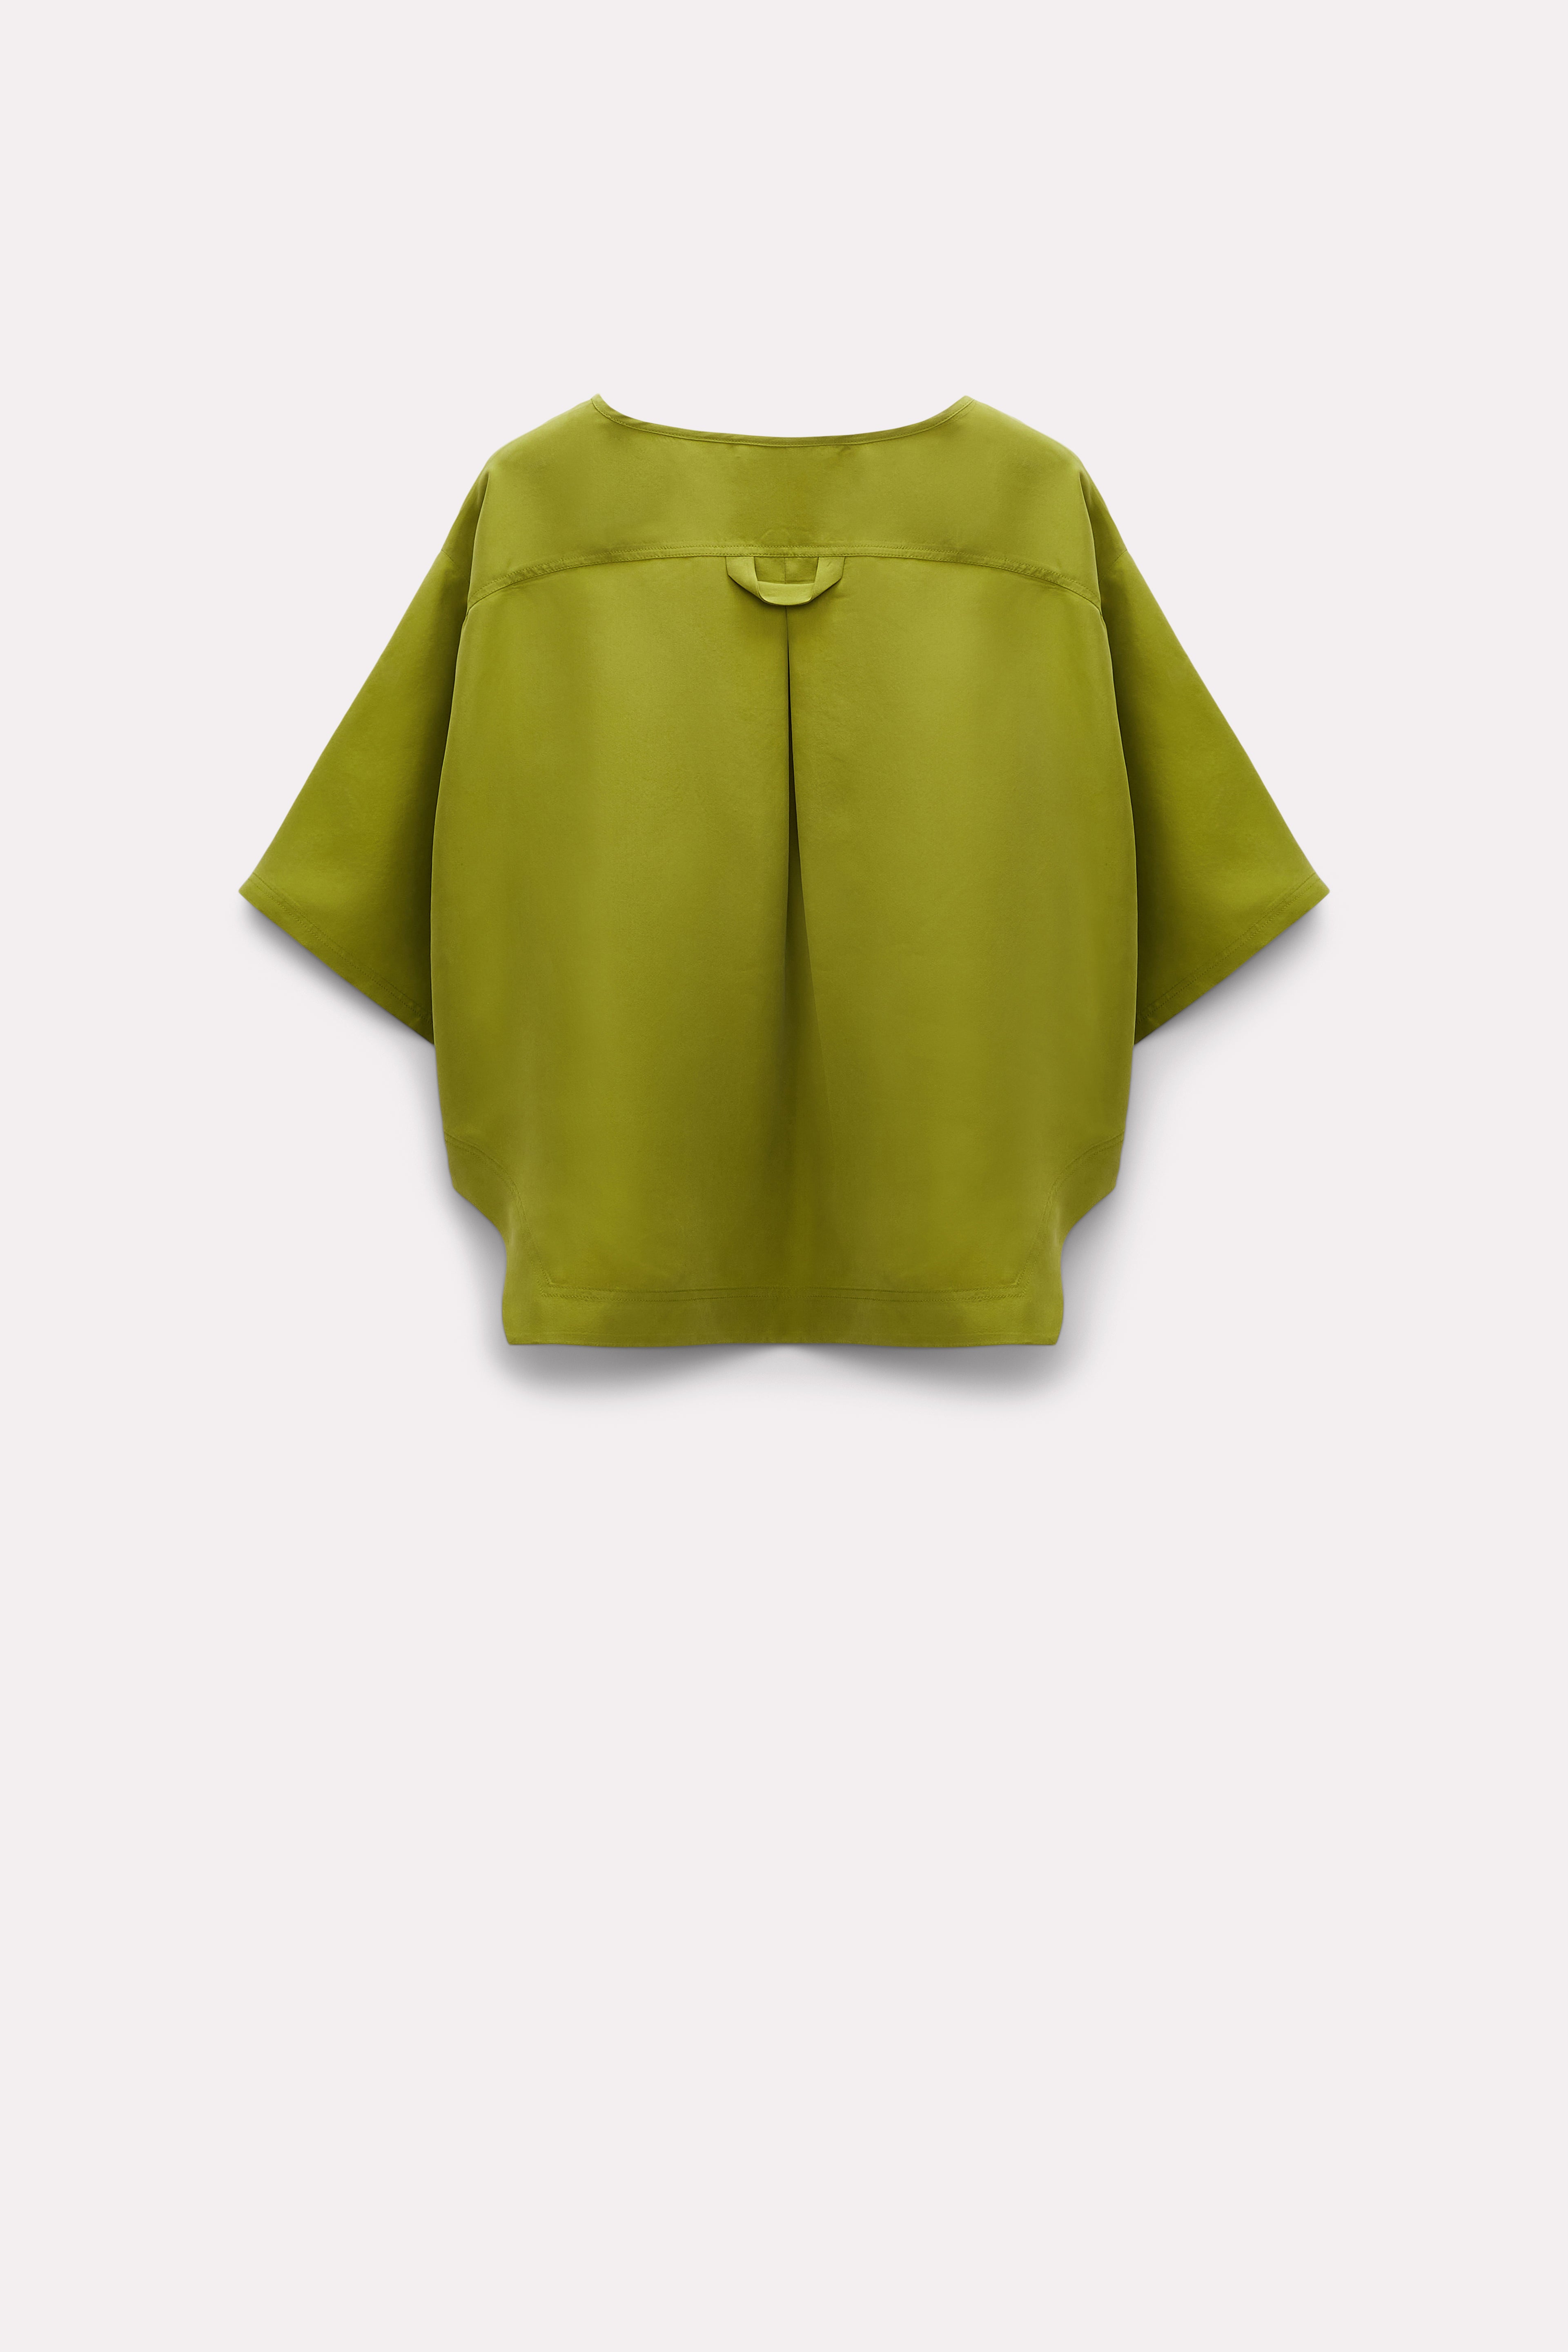 Dorothee-Schumacher-OUTLET-SALE-HERITAGE-EASE-blouse-Blusen-ARCHIVE-COLLECTION-2_8be08457-60c8-471d-8006-11ffb6df4276.jpg